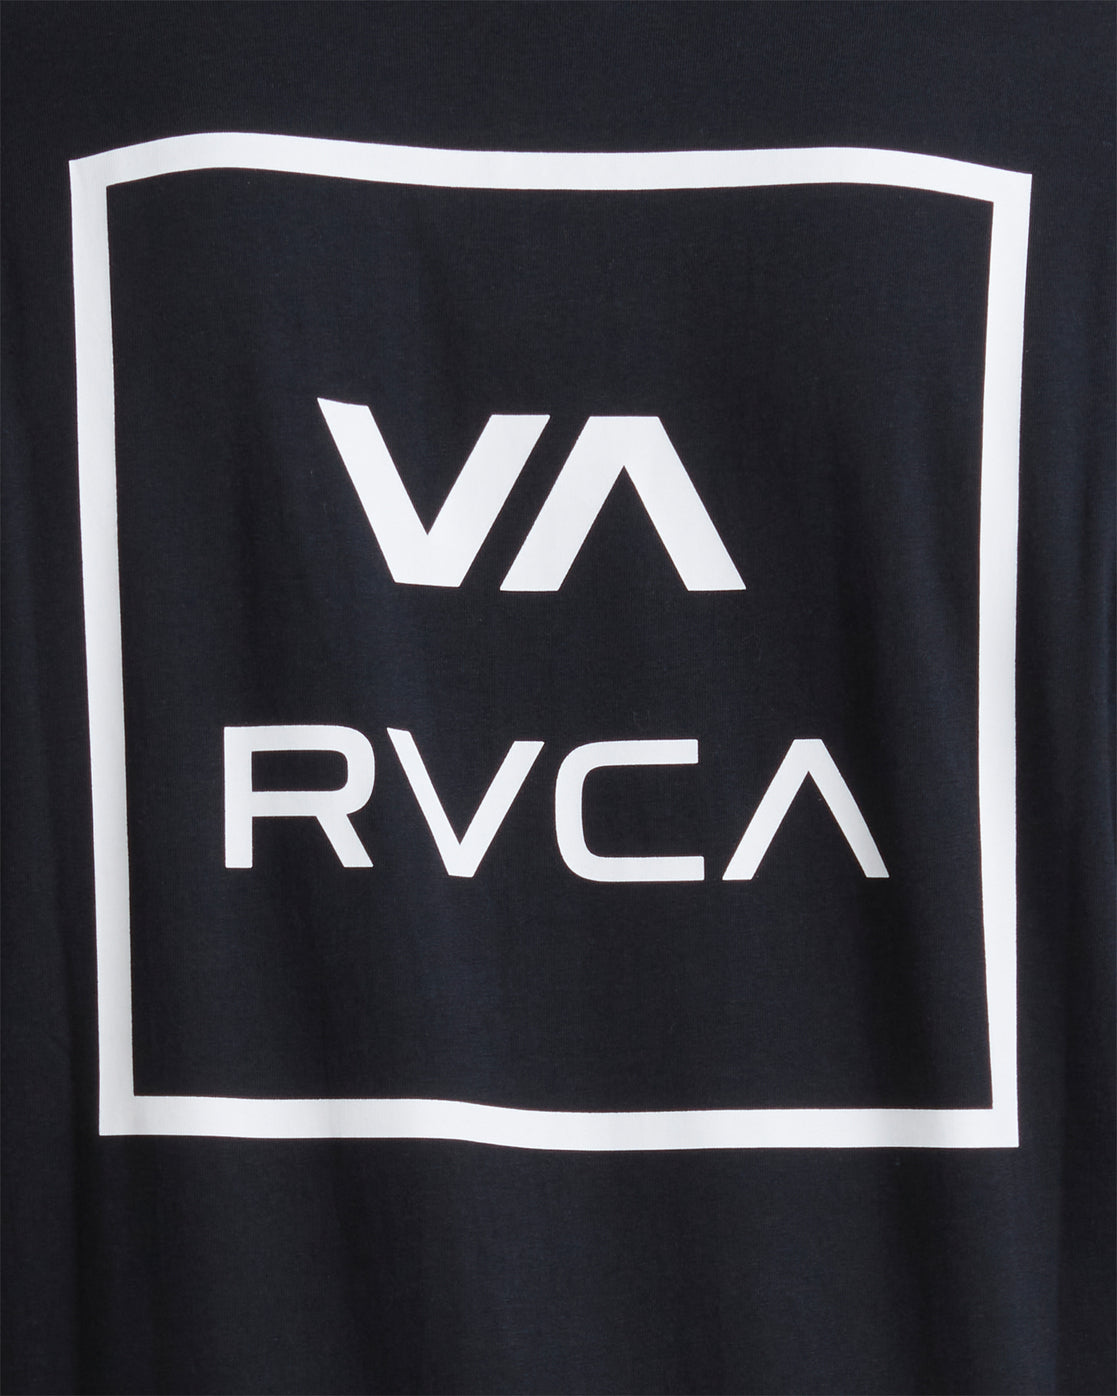 RVCA GOES ALL THE WAYS TEES - BLACK 